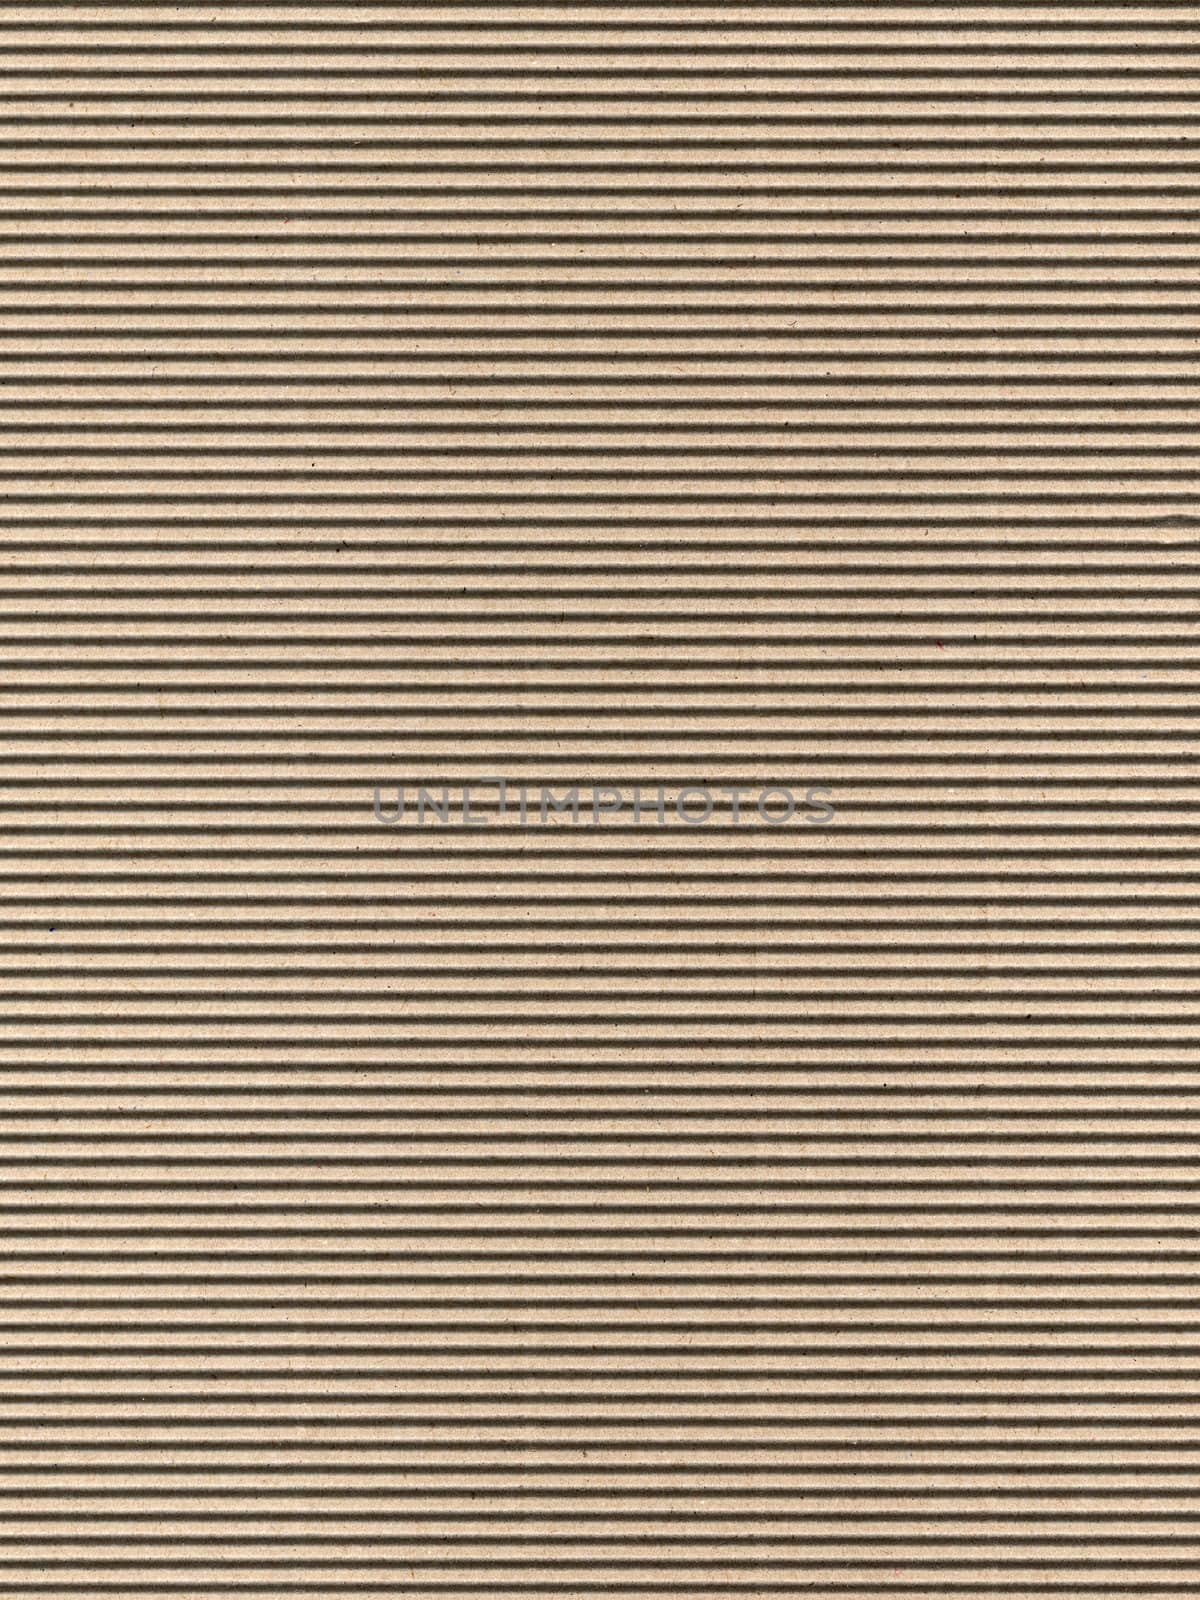 Seamless brown corrugated cardboard sheet useful as a background